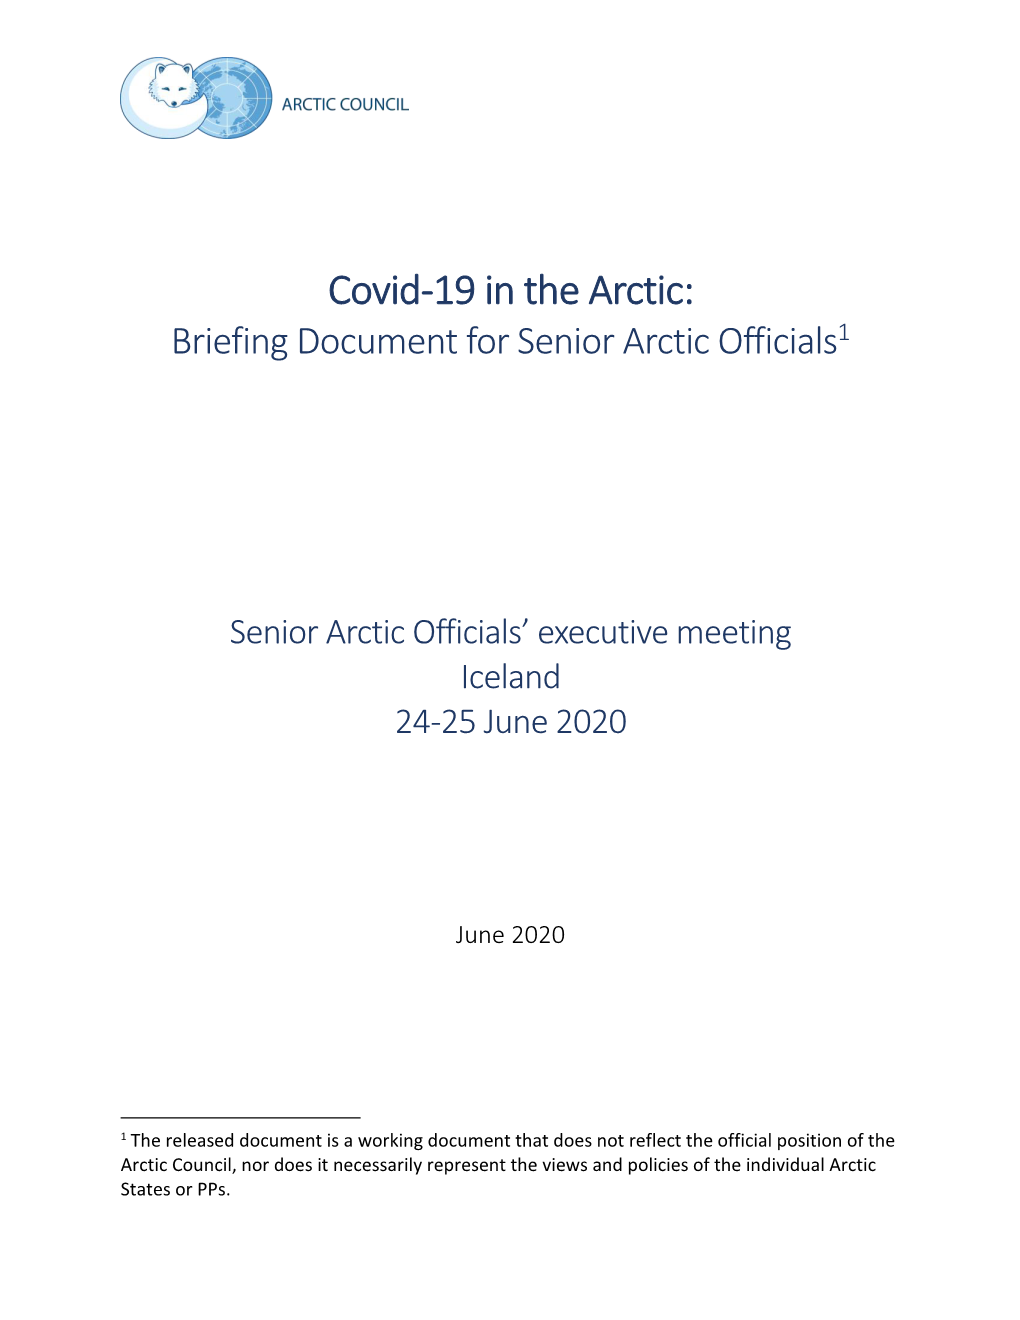 Covid-19 in the Arctic: Briefing Document for Senior Arctic Officials1